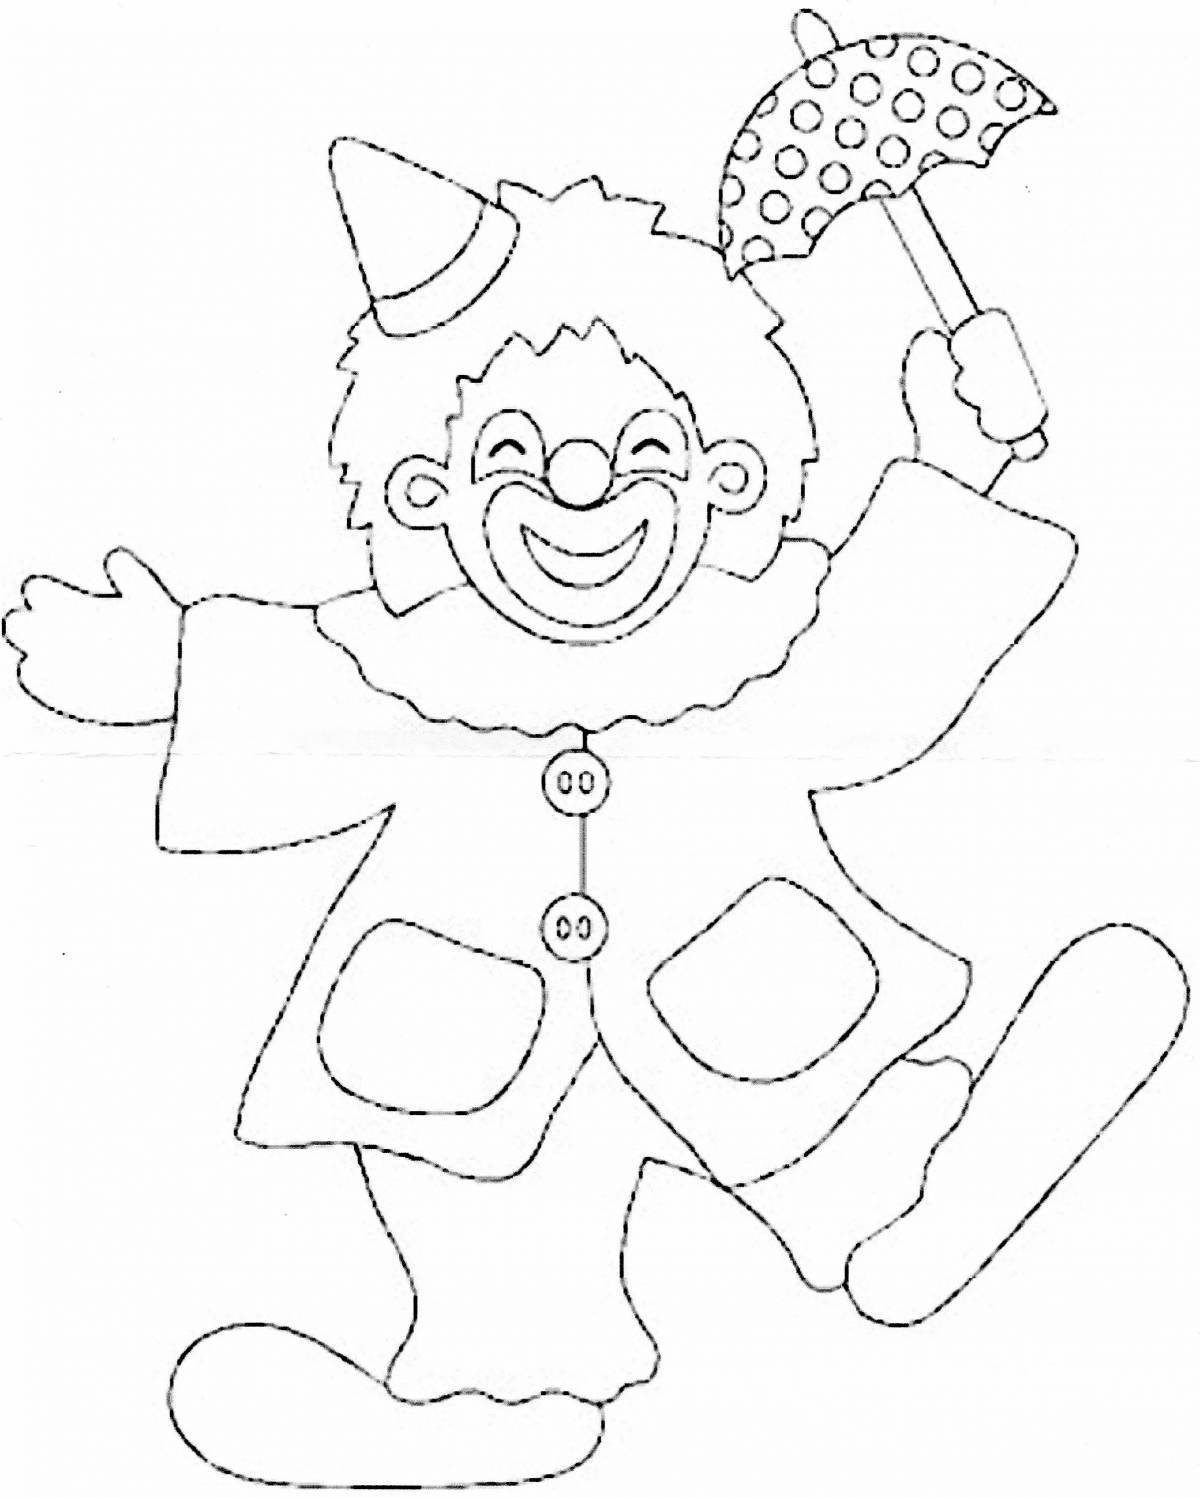 Attractive jester coloring page